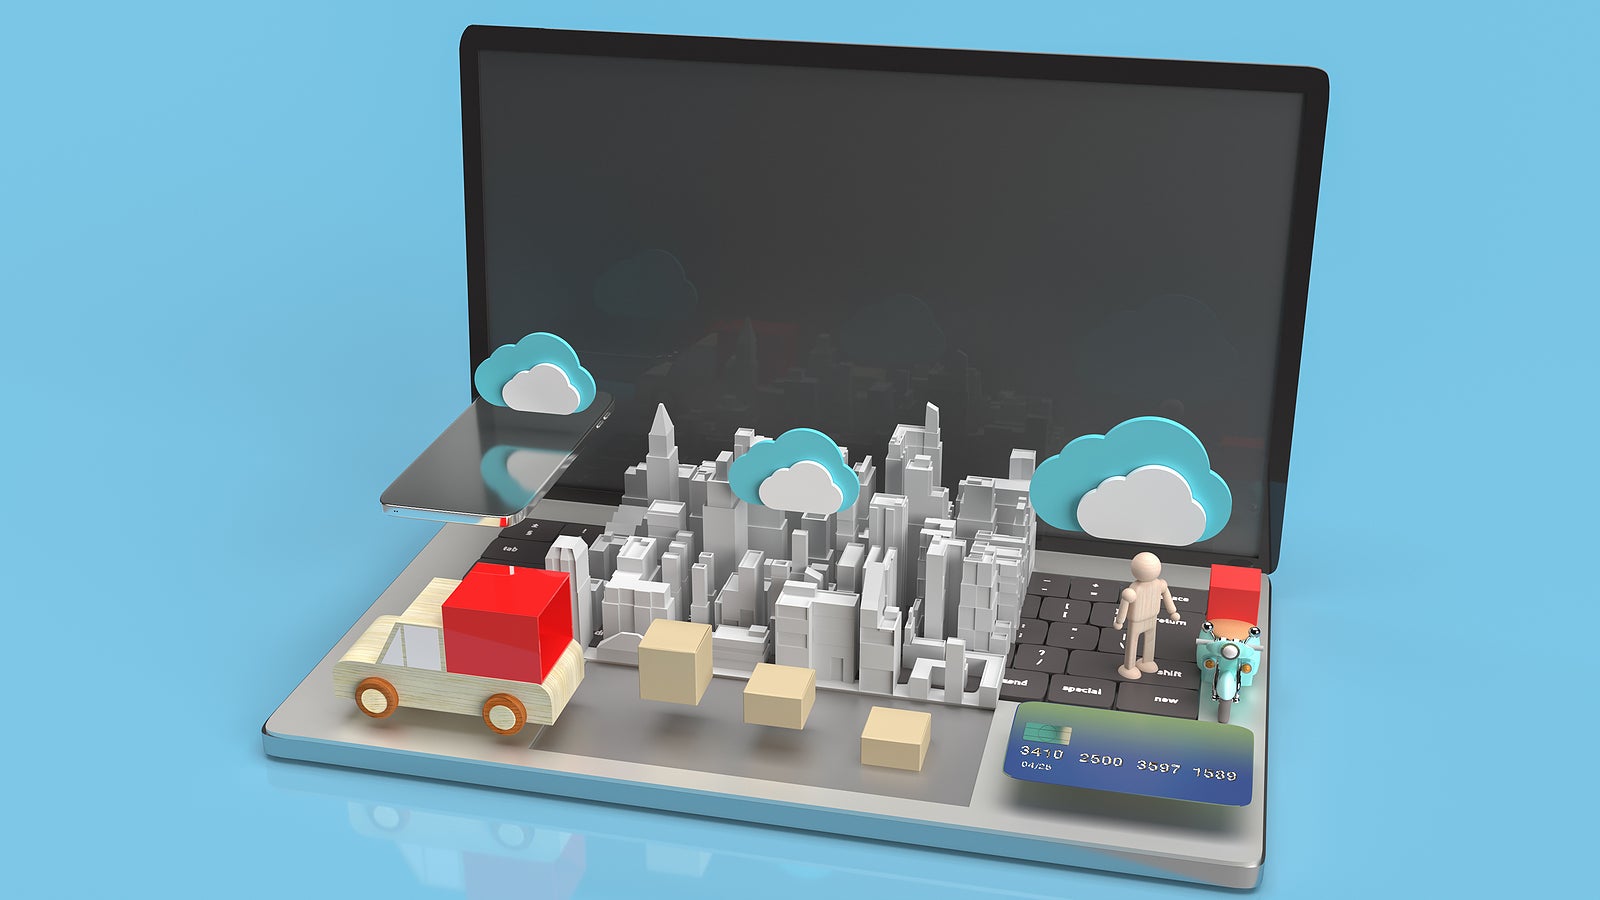 cloud and technology equipment for CLOUD COMPUTING content 3d rendering.